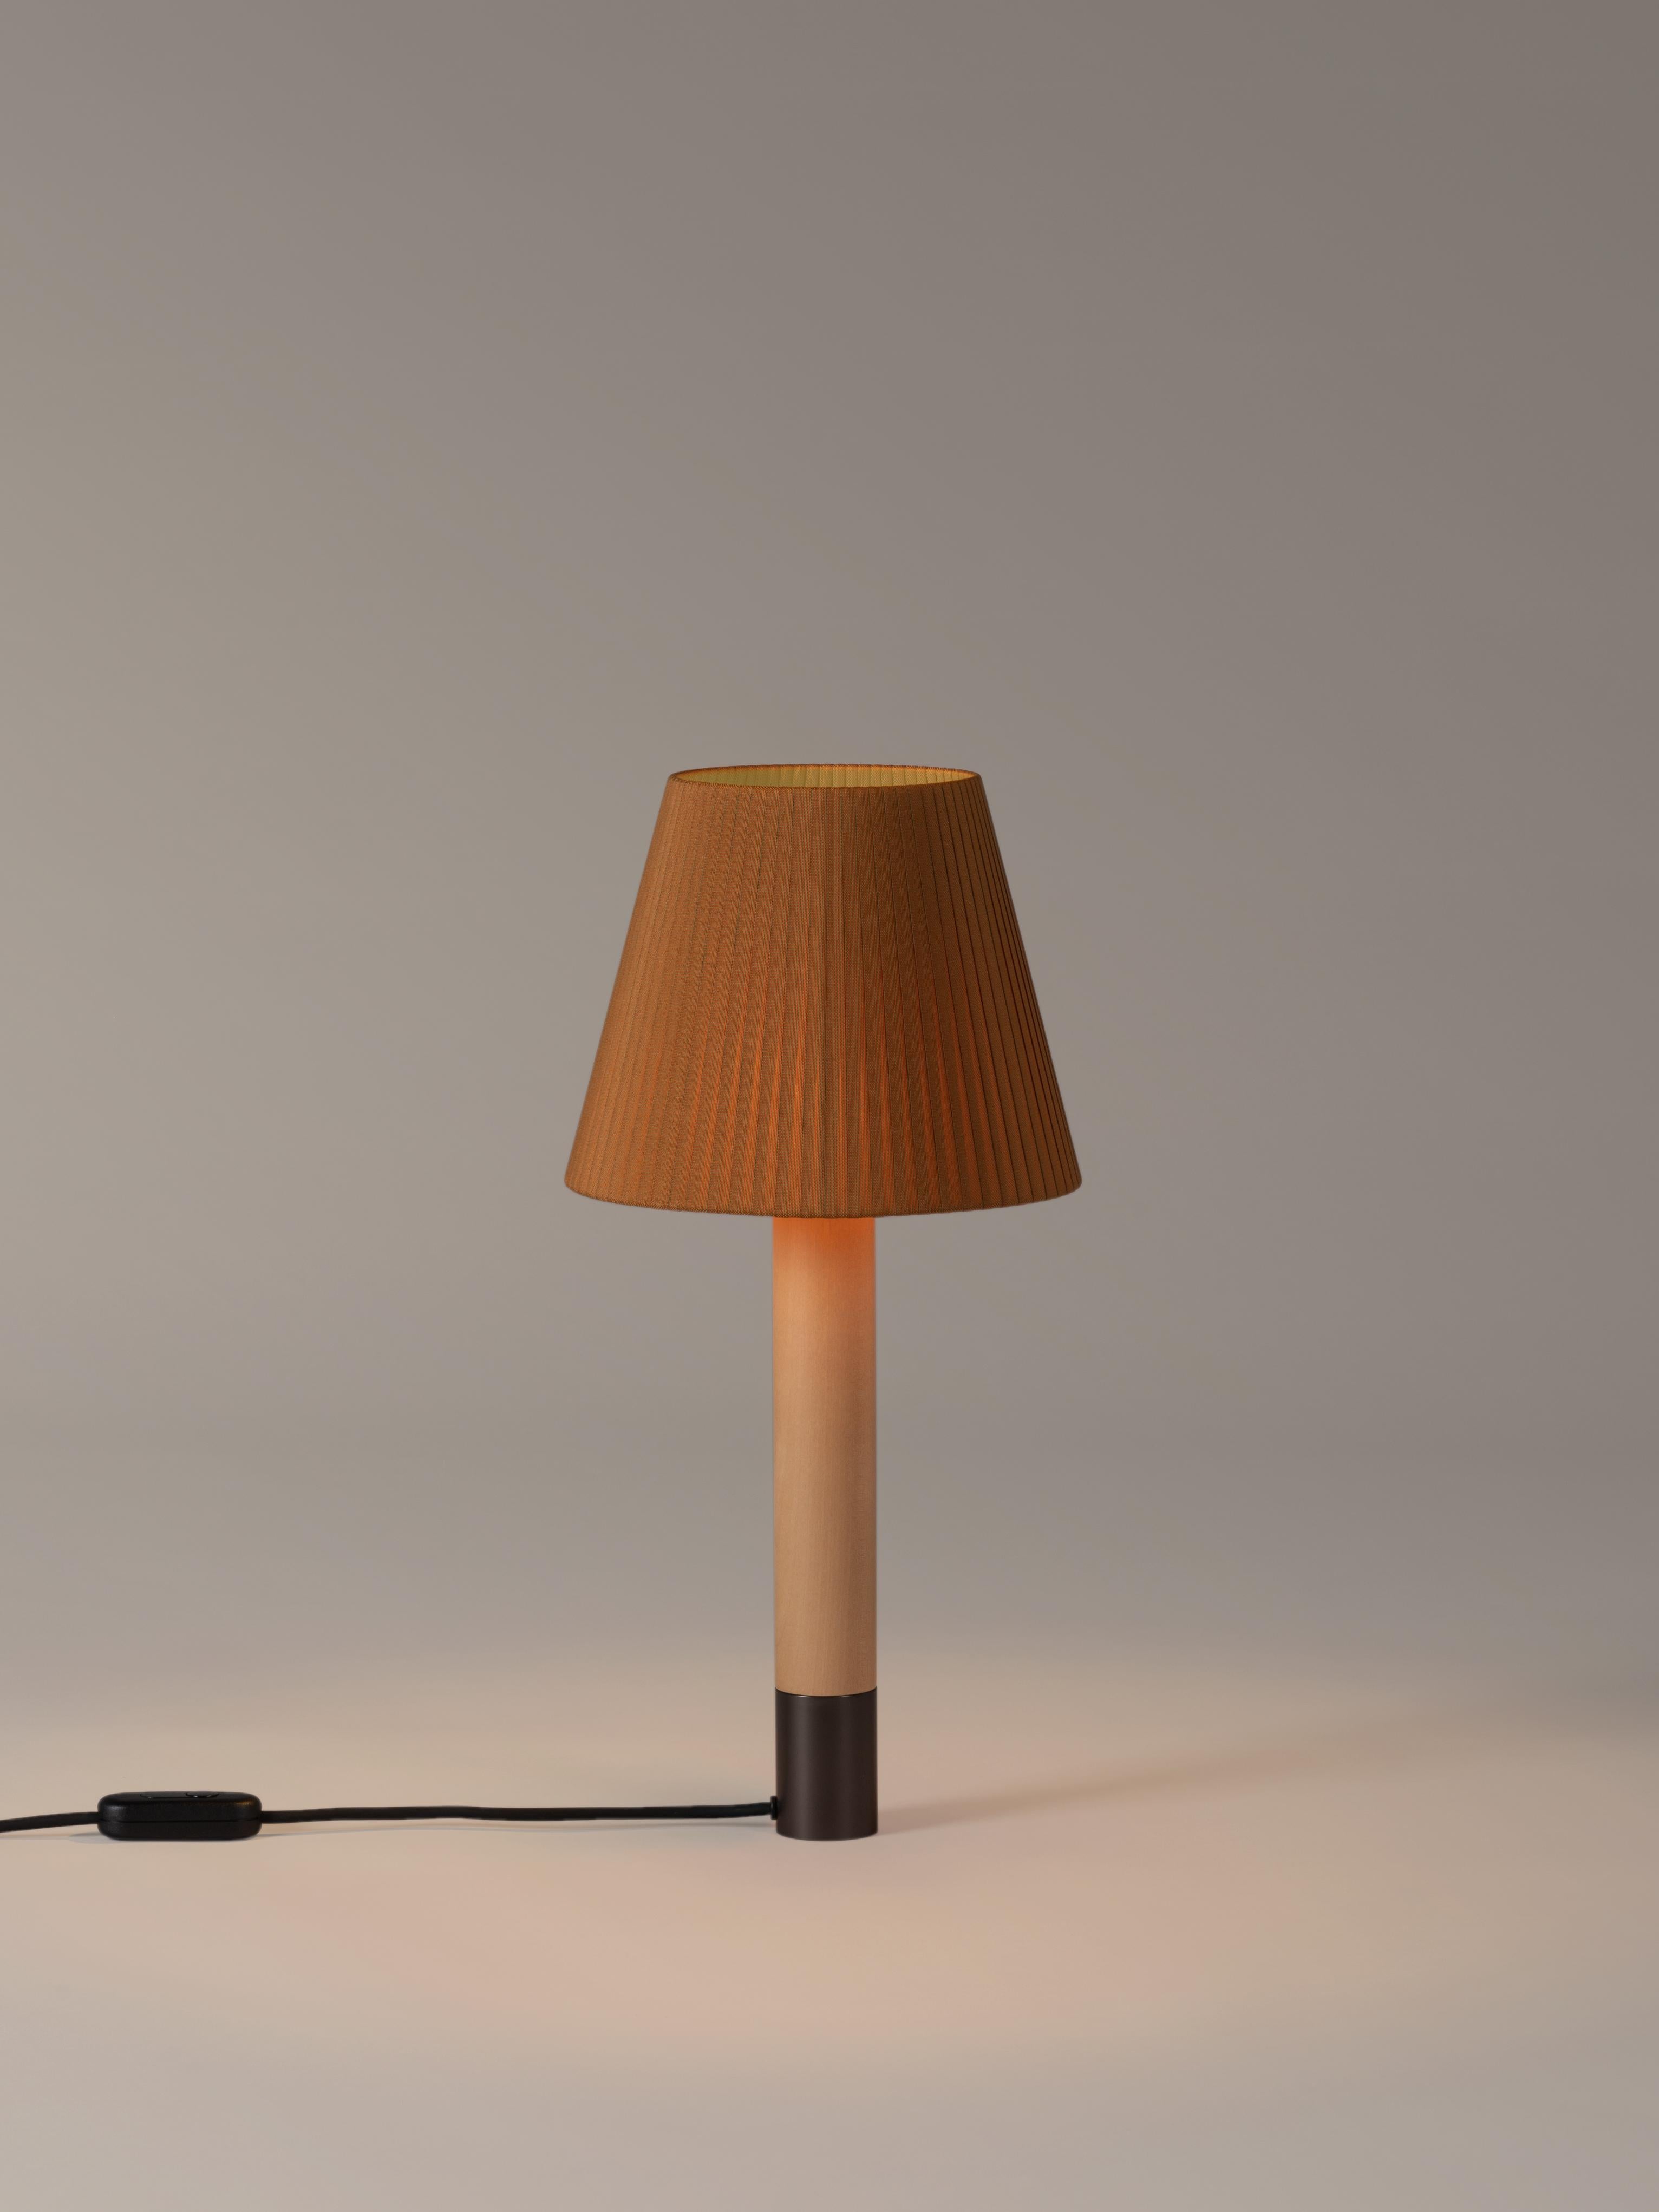 Bronze and Mustard Básica M1 table lamp by Santiago Roqueta, Santa & Cole.
Dimensions: D 25 x H 52 cm
Materials: Bronze, birch wood, ribbon.
Available in other shade colors and with or without the stabilizing disc.
Available in nickel or